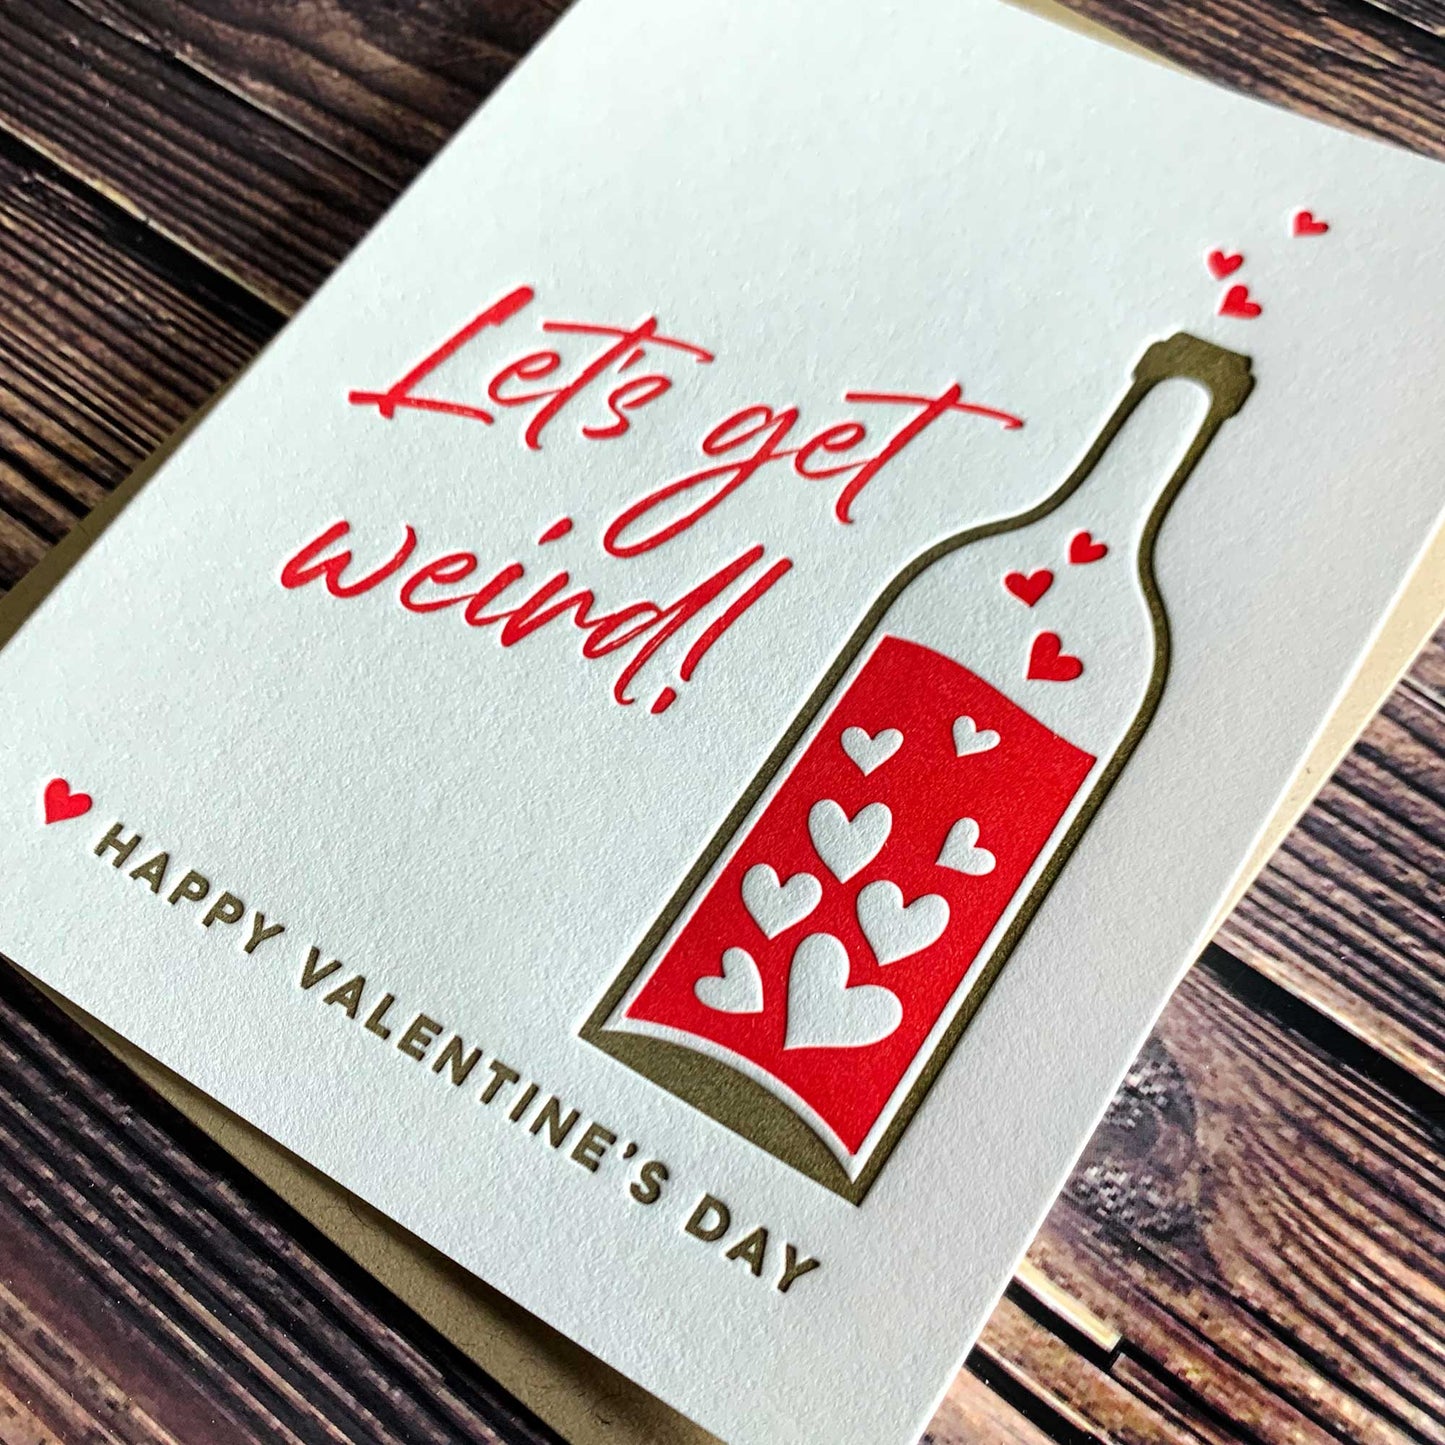 Let's get weird, Happy Valentine's Day, Funny Valentines card for him, wine bottle with heart bubbles, Letterpress printed, view shows letterpress impression, includes envelope